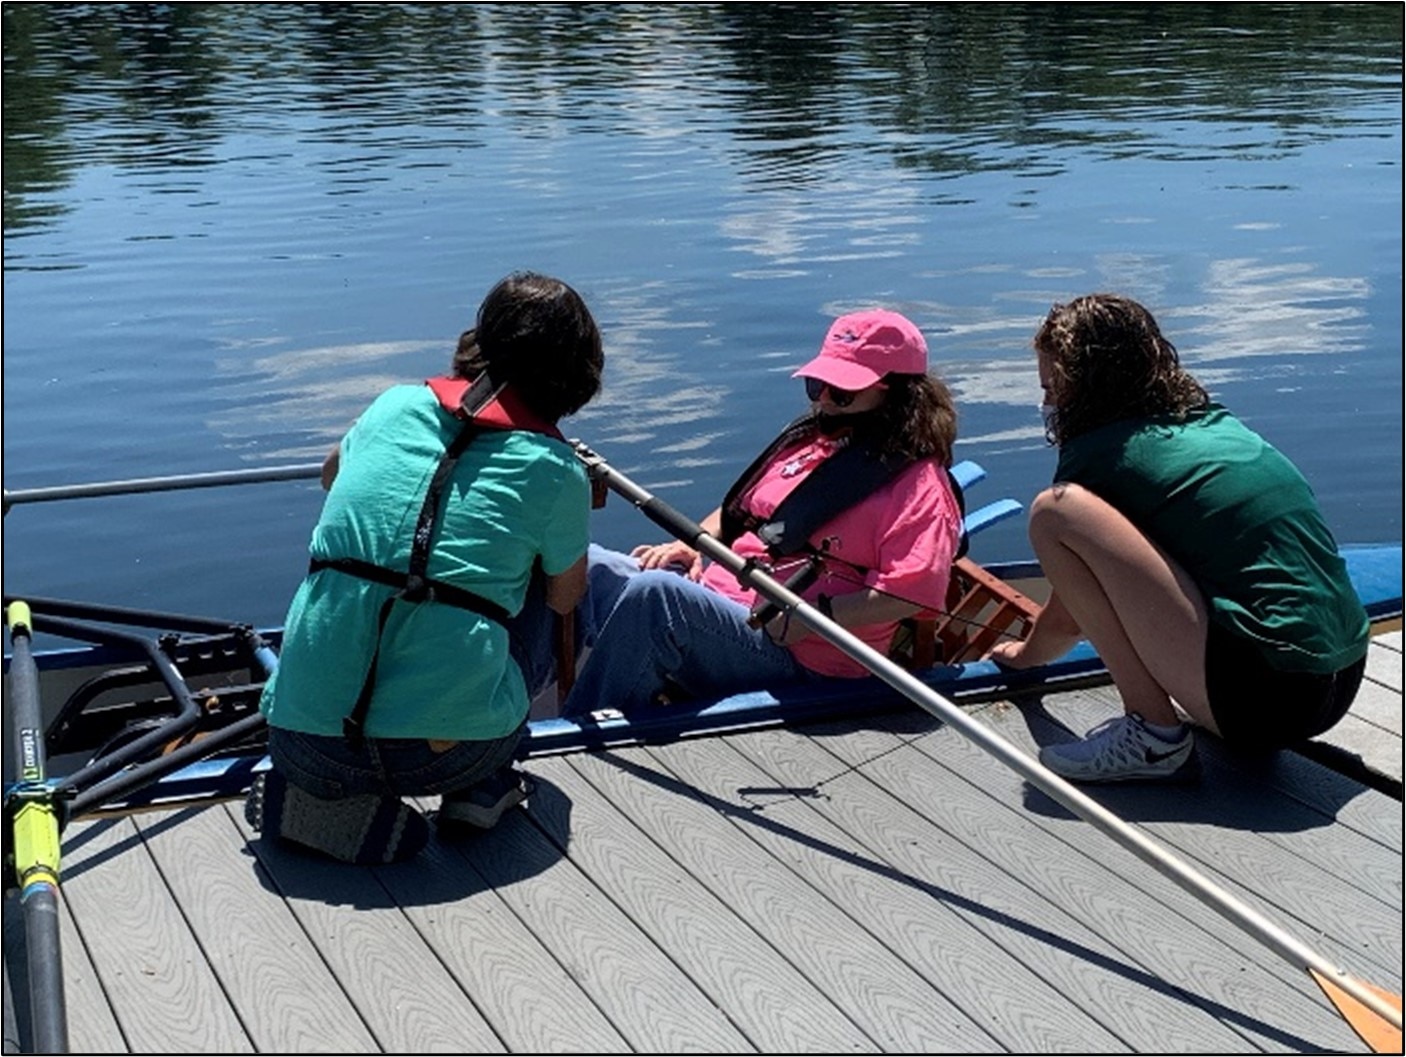 A rower at a dock is being assisted by two people.